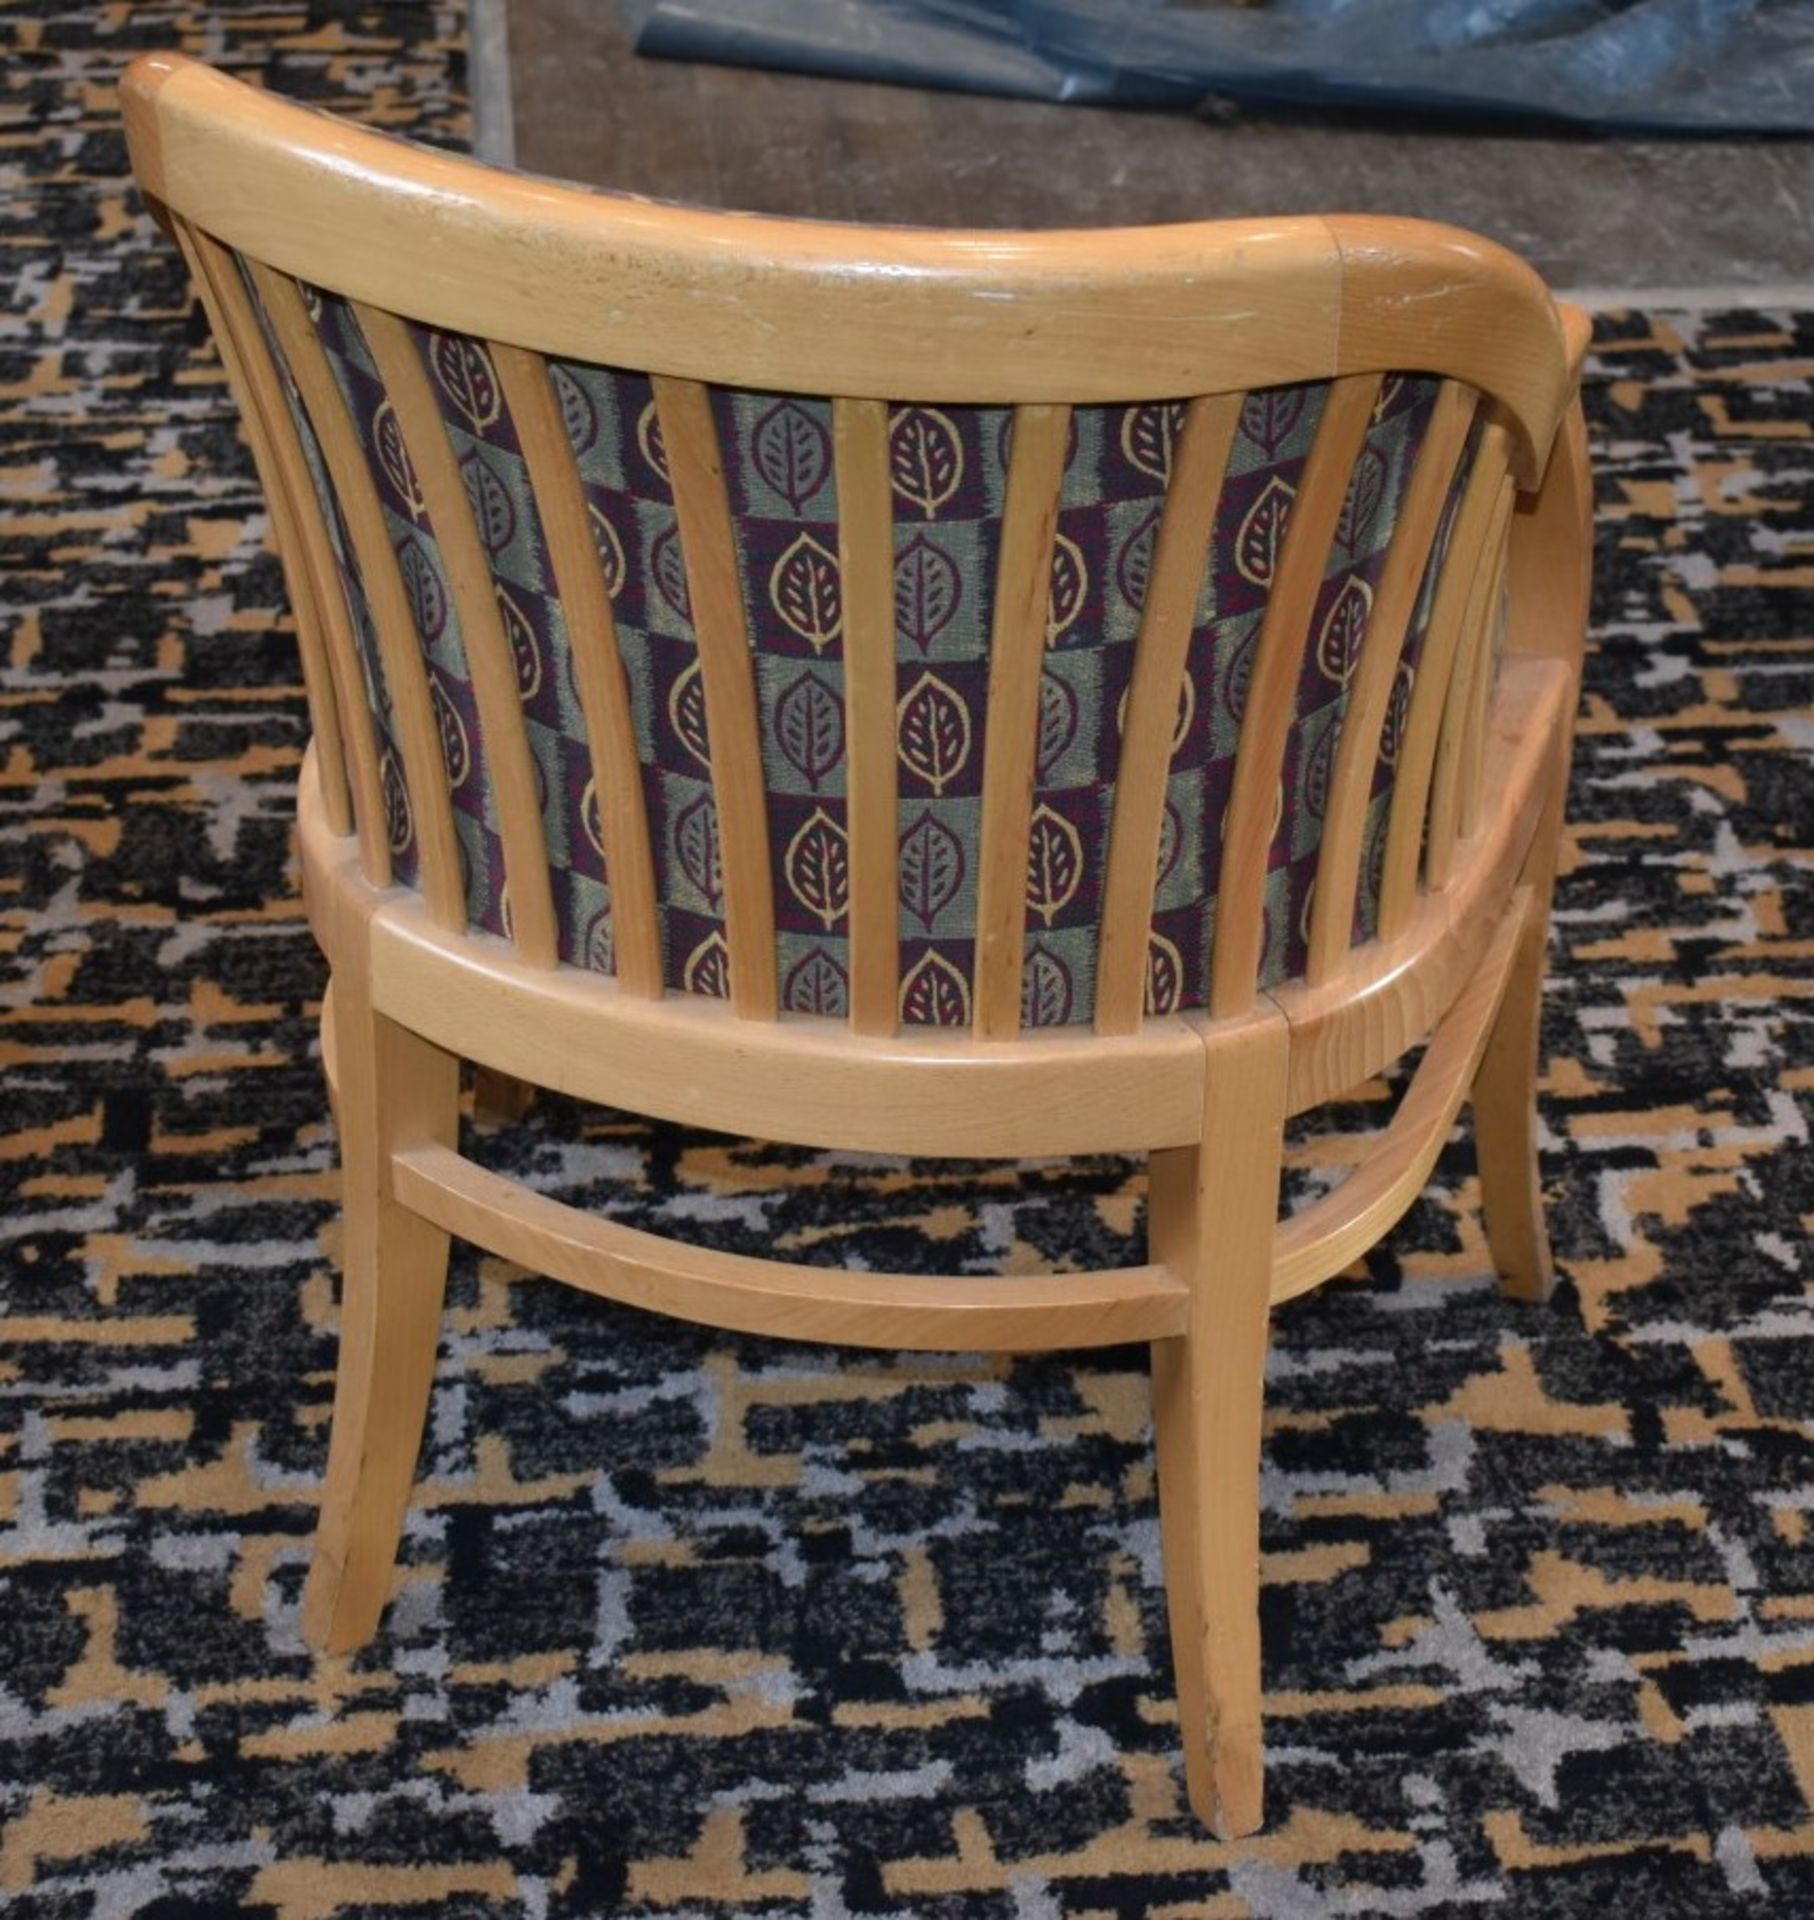 8 x Light Wooden Dining Tub Chairs With Leaf Design Upholstery - Ideal For Conservatories, Clubs, - Image 3 of 5